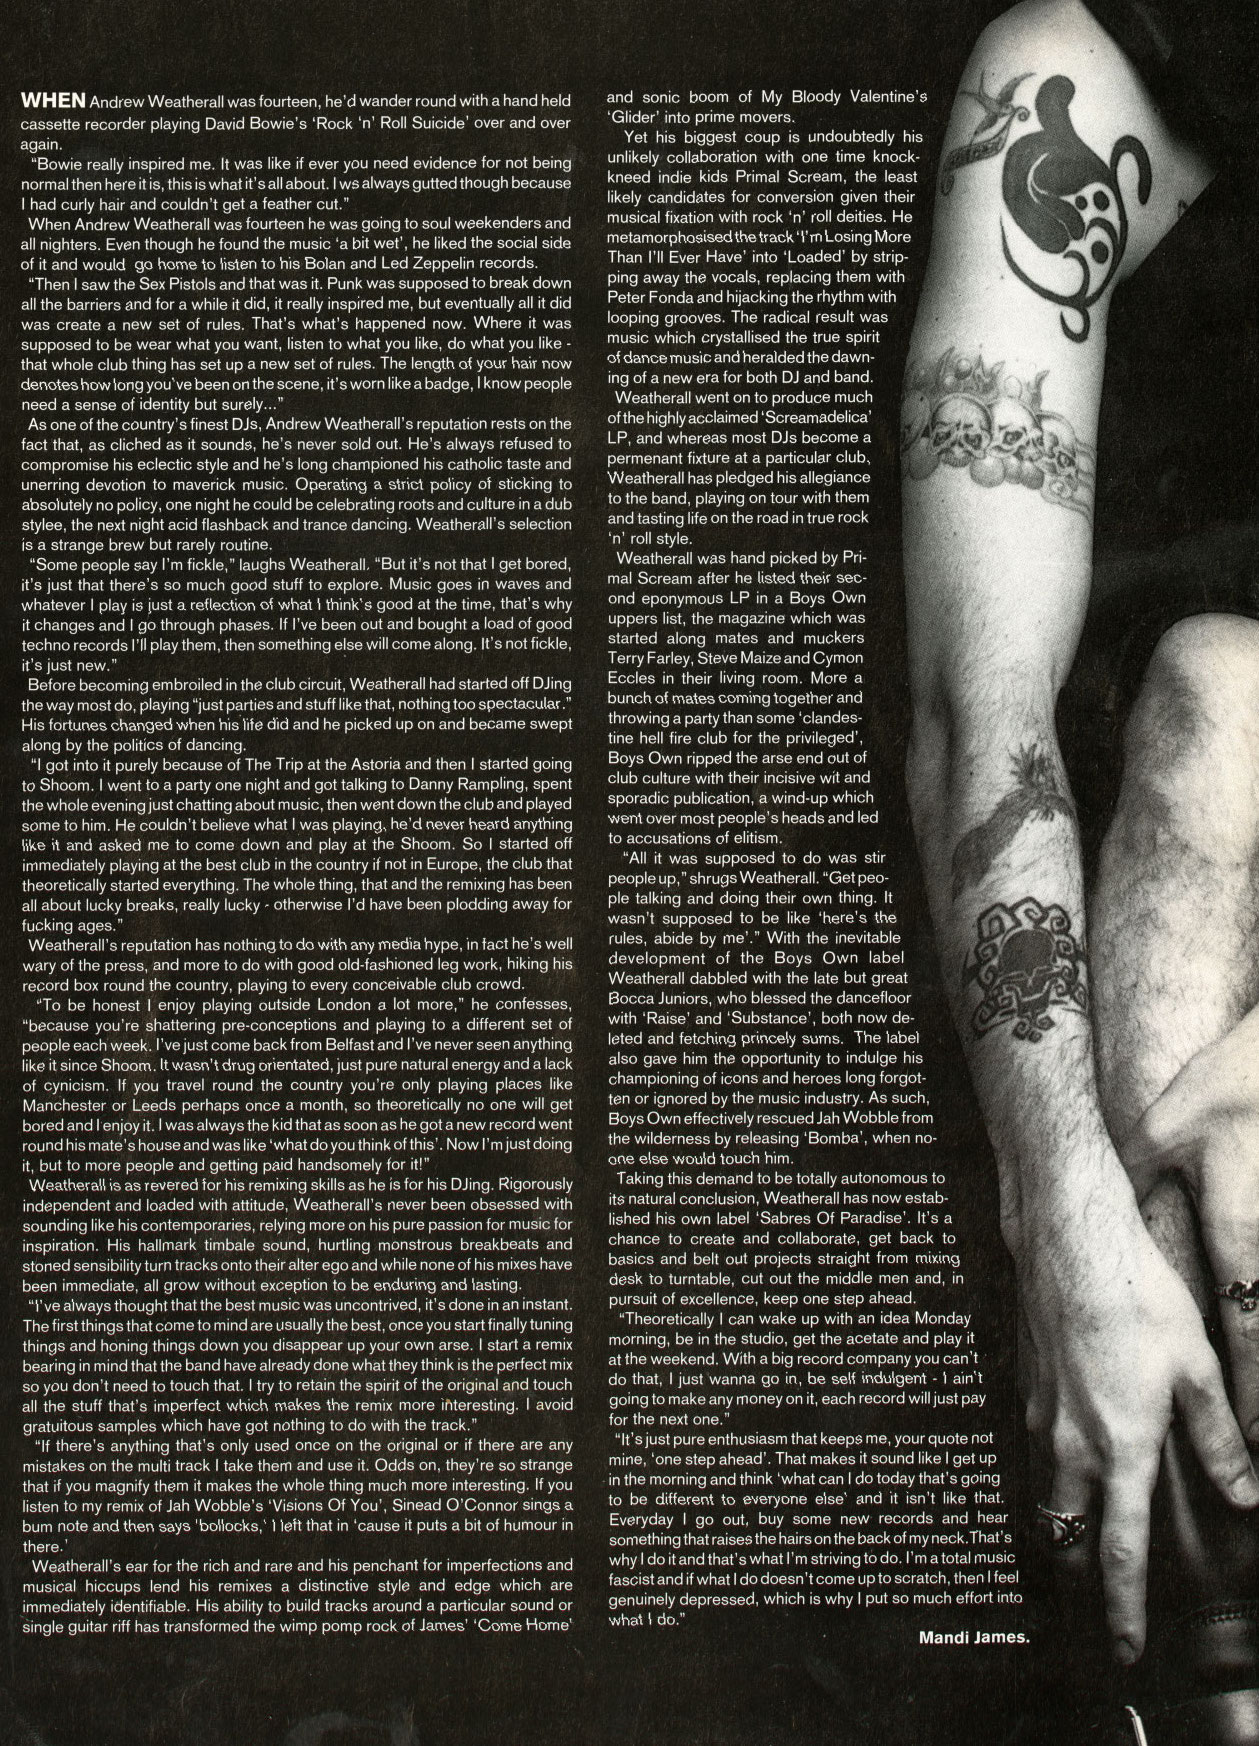 Andrew Weatherall, DJ, Producer, Interview, 1992, Mixmag, Boy's Own, 